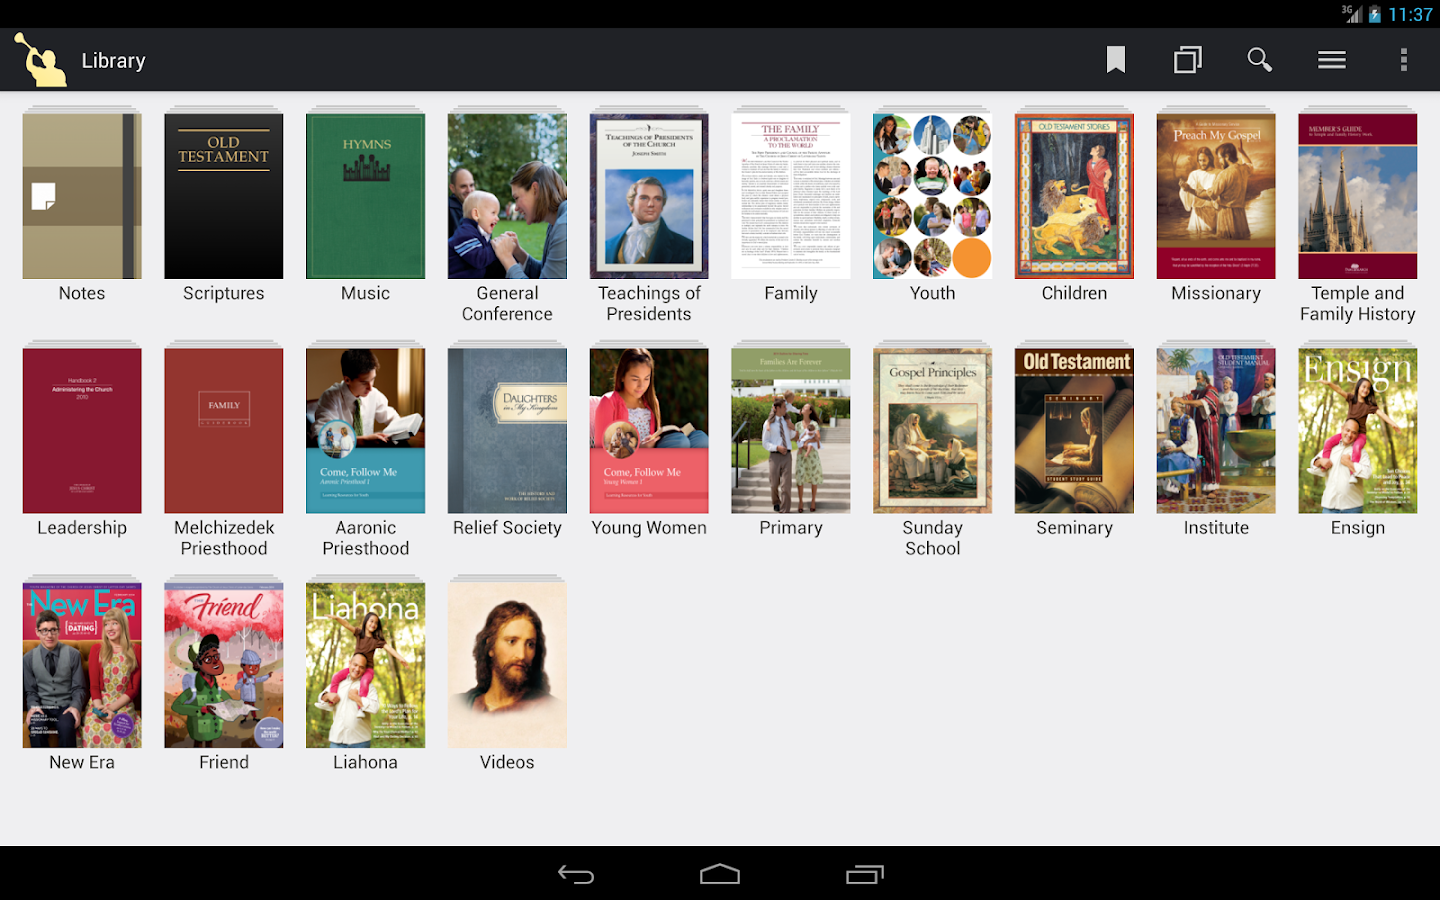 36 Top Pictures Book Library App Android / Kobo Books - Reading App » Apk Thing - Android Apps Free ...